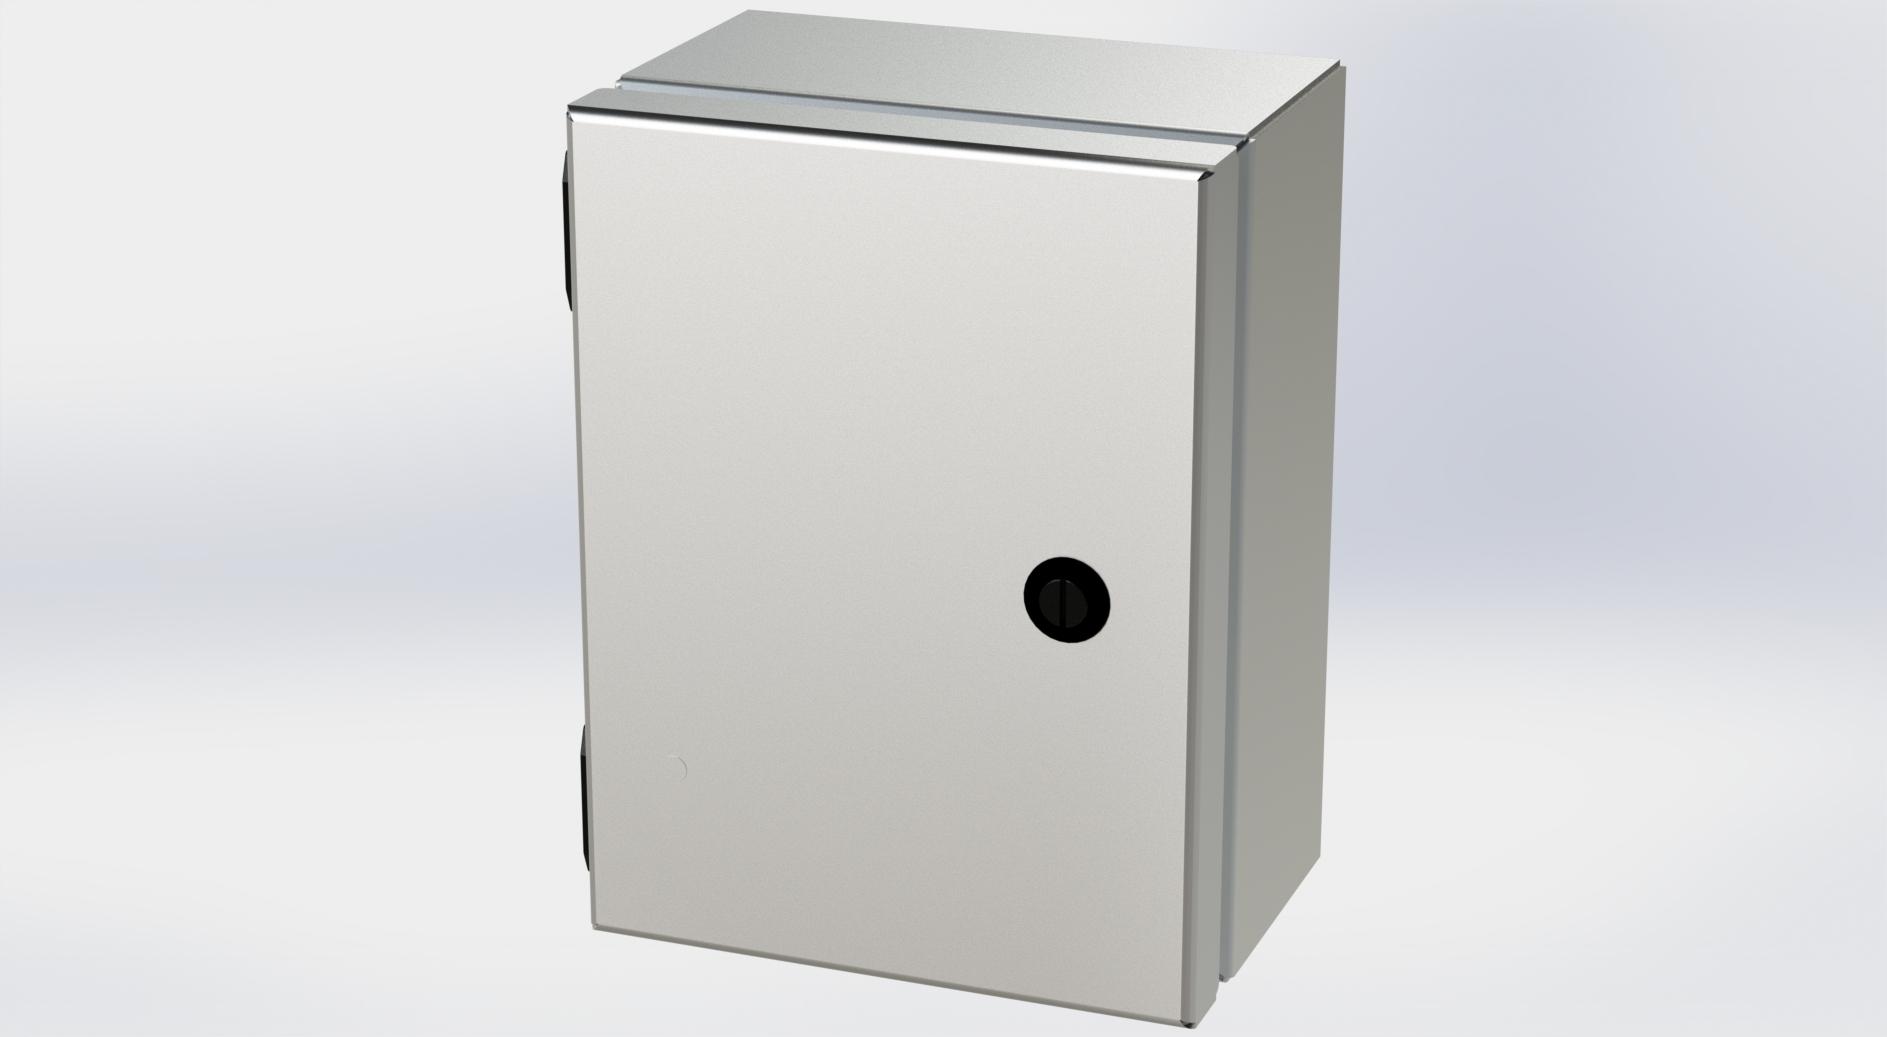 Saginaw Control SCE-806ELJSS6 S.S. ELJ Enclosure, Height:8.00", Width:6.00", Depth:4.00", #4 brushed finish on all exterior surfaces. Optional sub-panels are powder coated white.